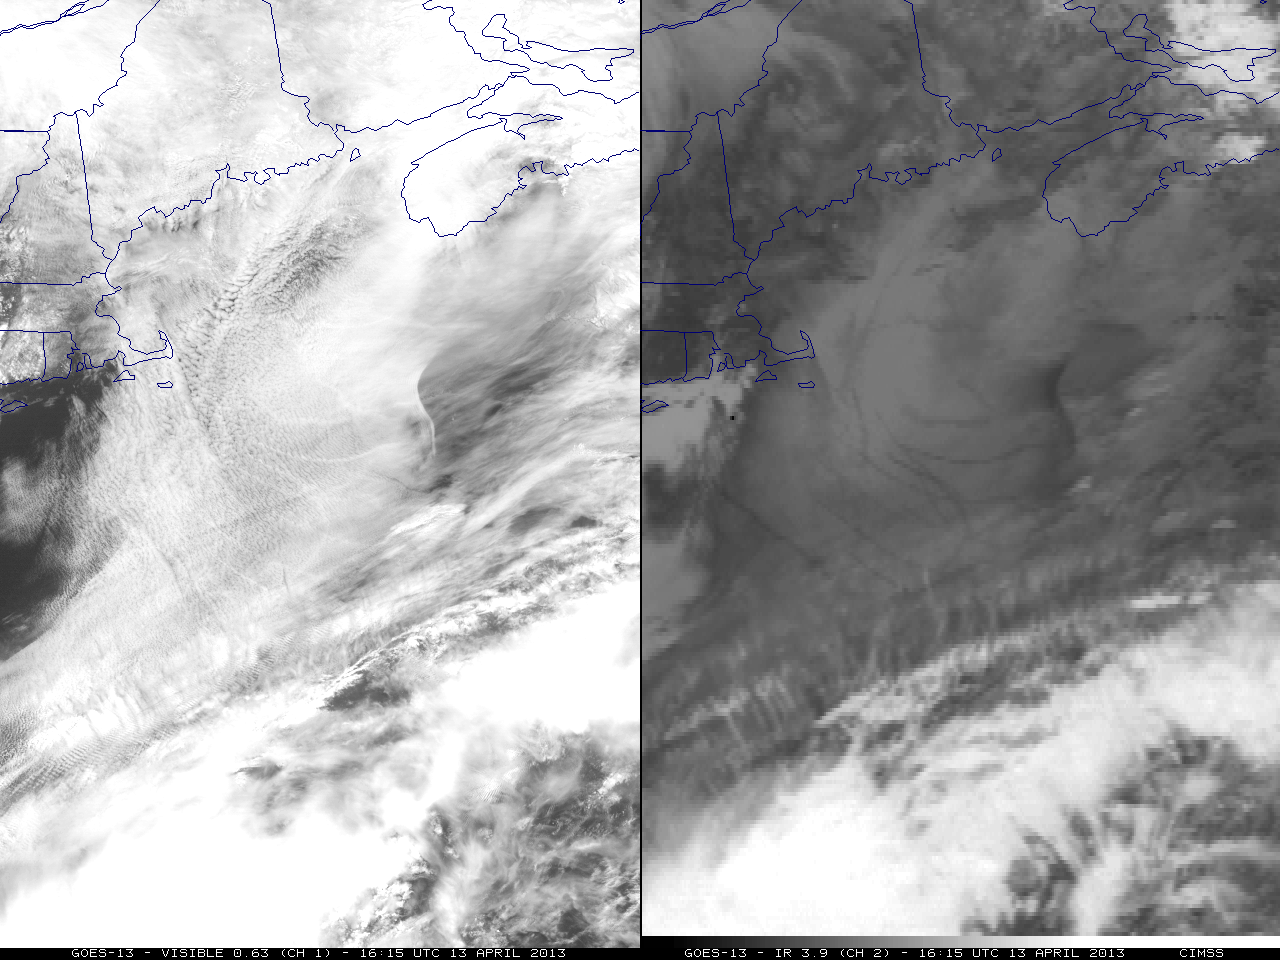 GOES-13 0.63 Âµm visible (left) and 3.9 Âµm shortwave IR (right) images (click image to play animation)